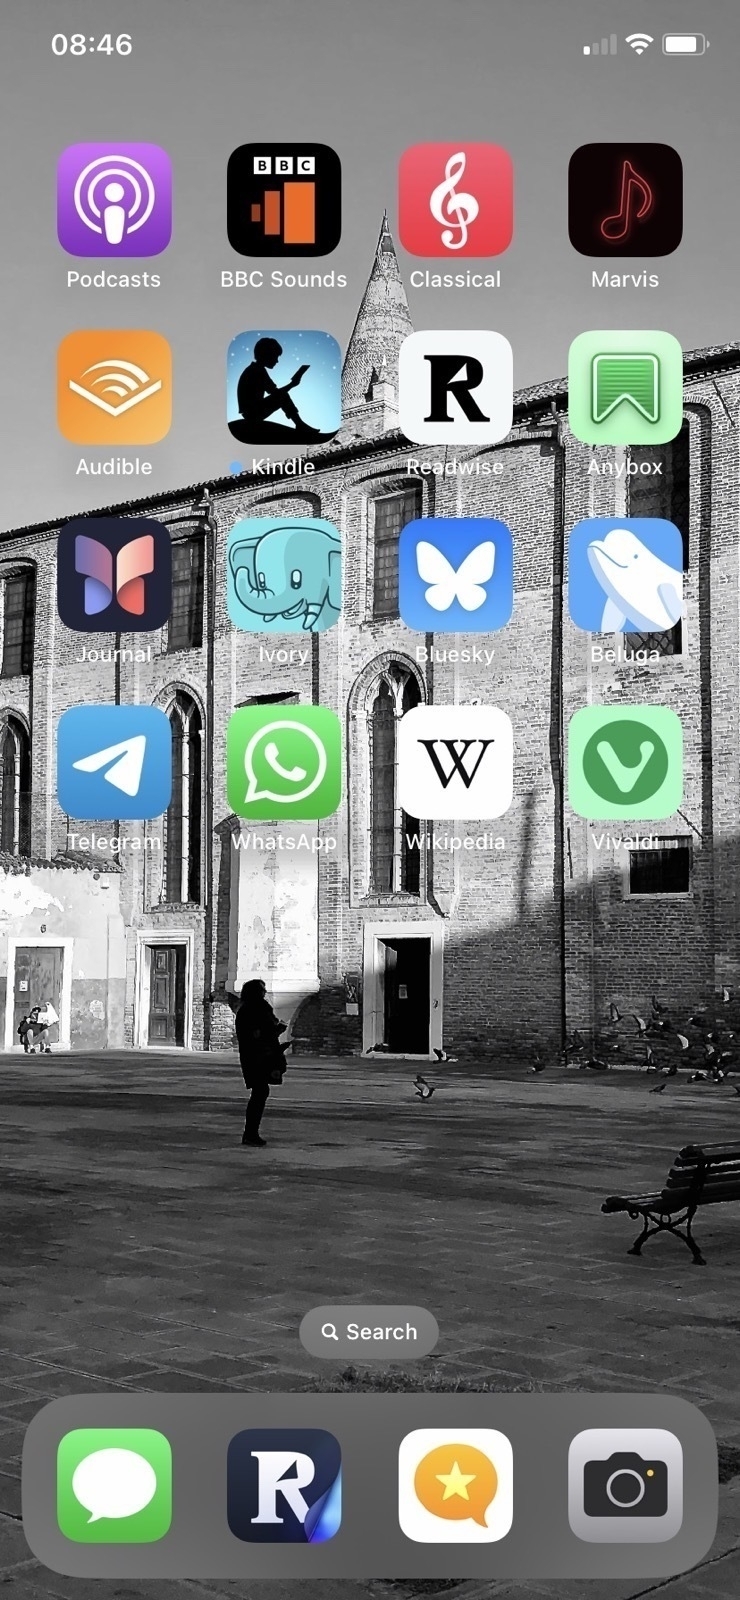 A smartphone screen displaying various app icons. The background is a black and white photo of a square with people and birds.